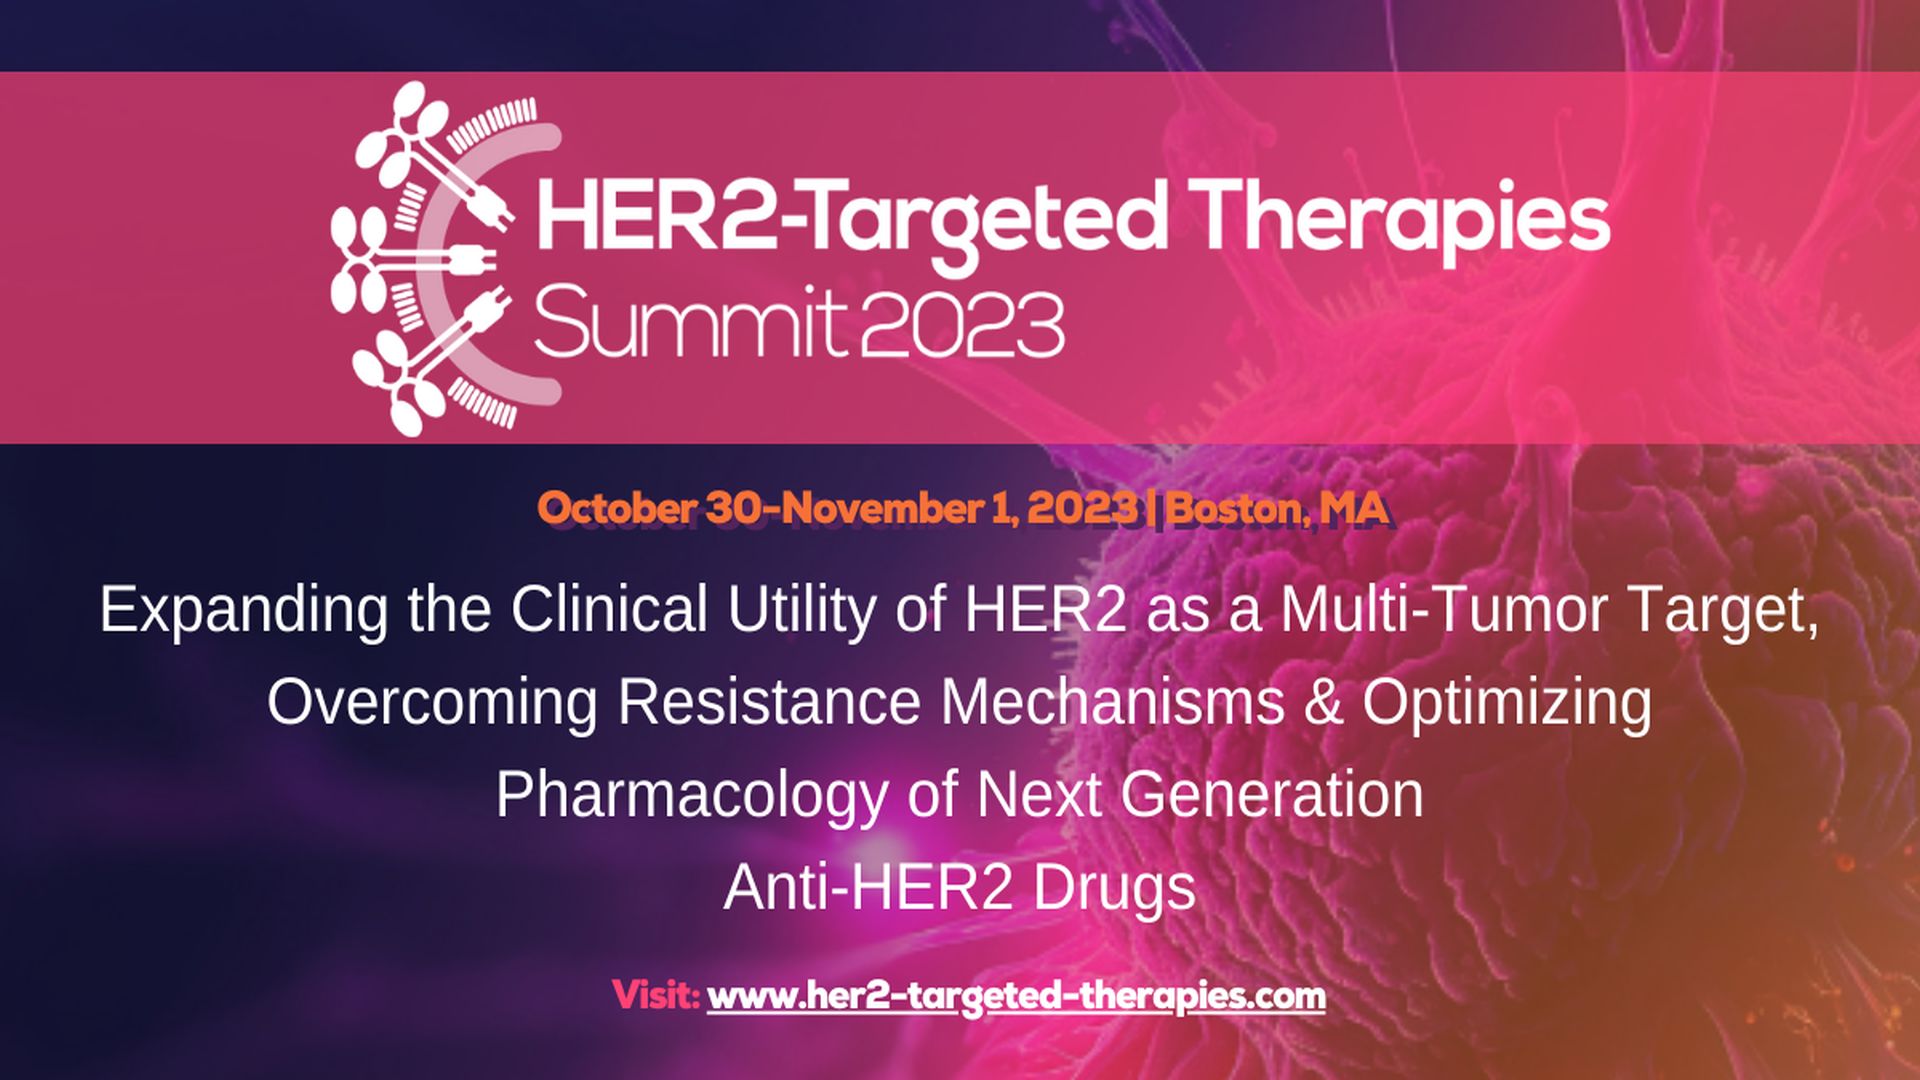 HER2-Targeted Therapies Summit 2023